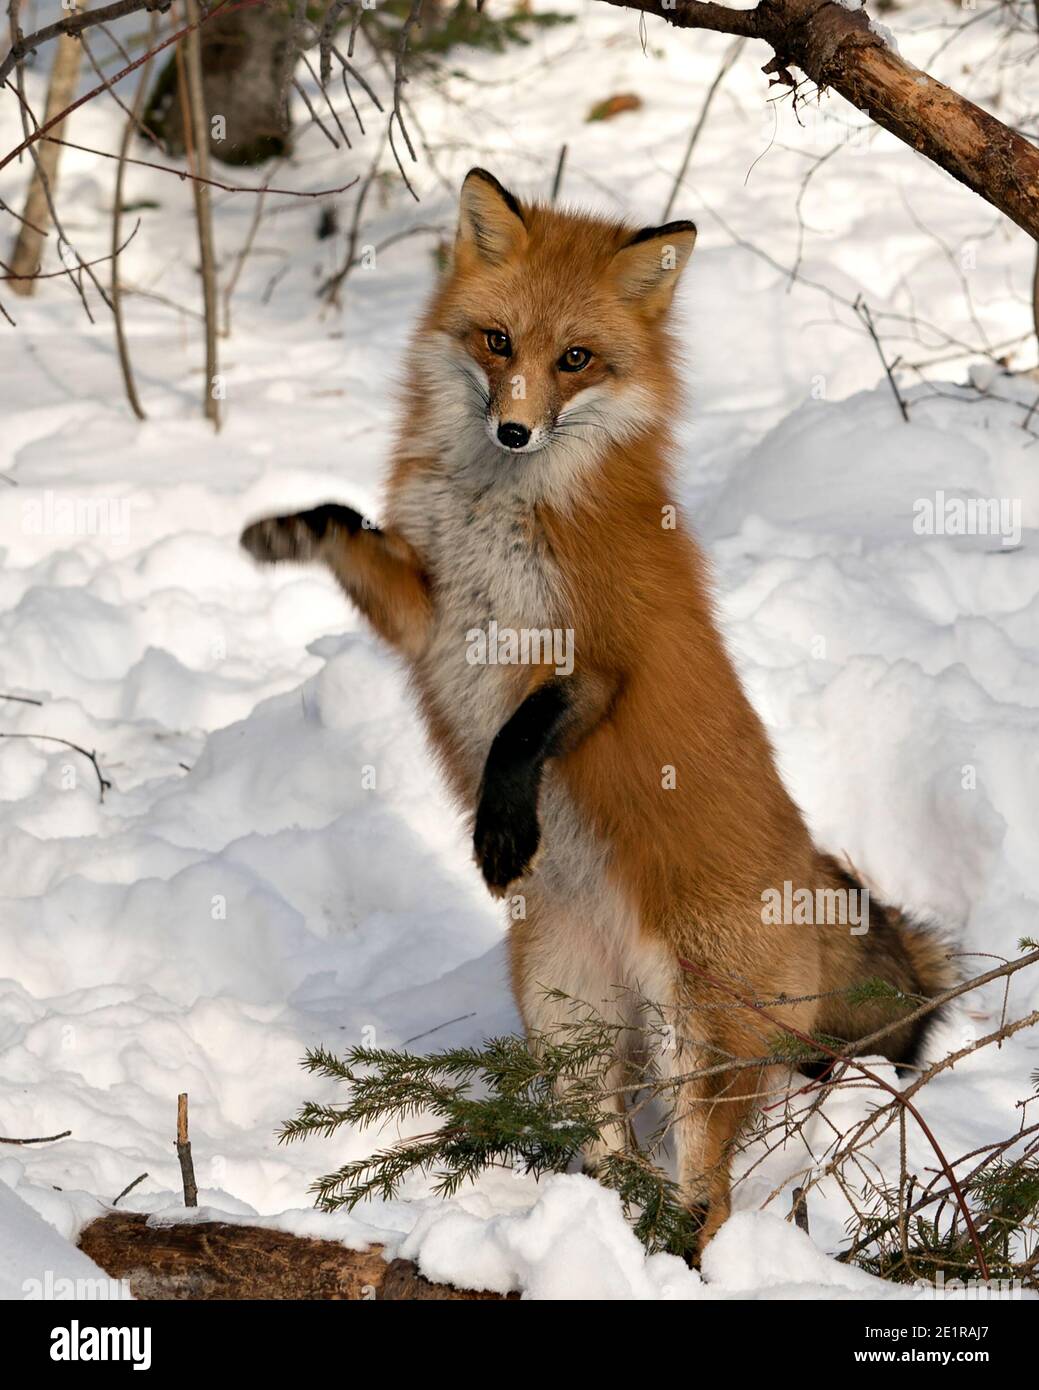 Red fox looking at camera and standing on back legs in the winter season in its environment and habitat with snow and branches background. Fox Image. Stock Photo